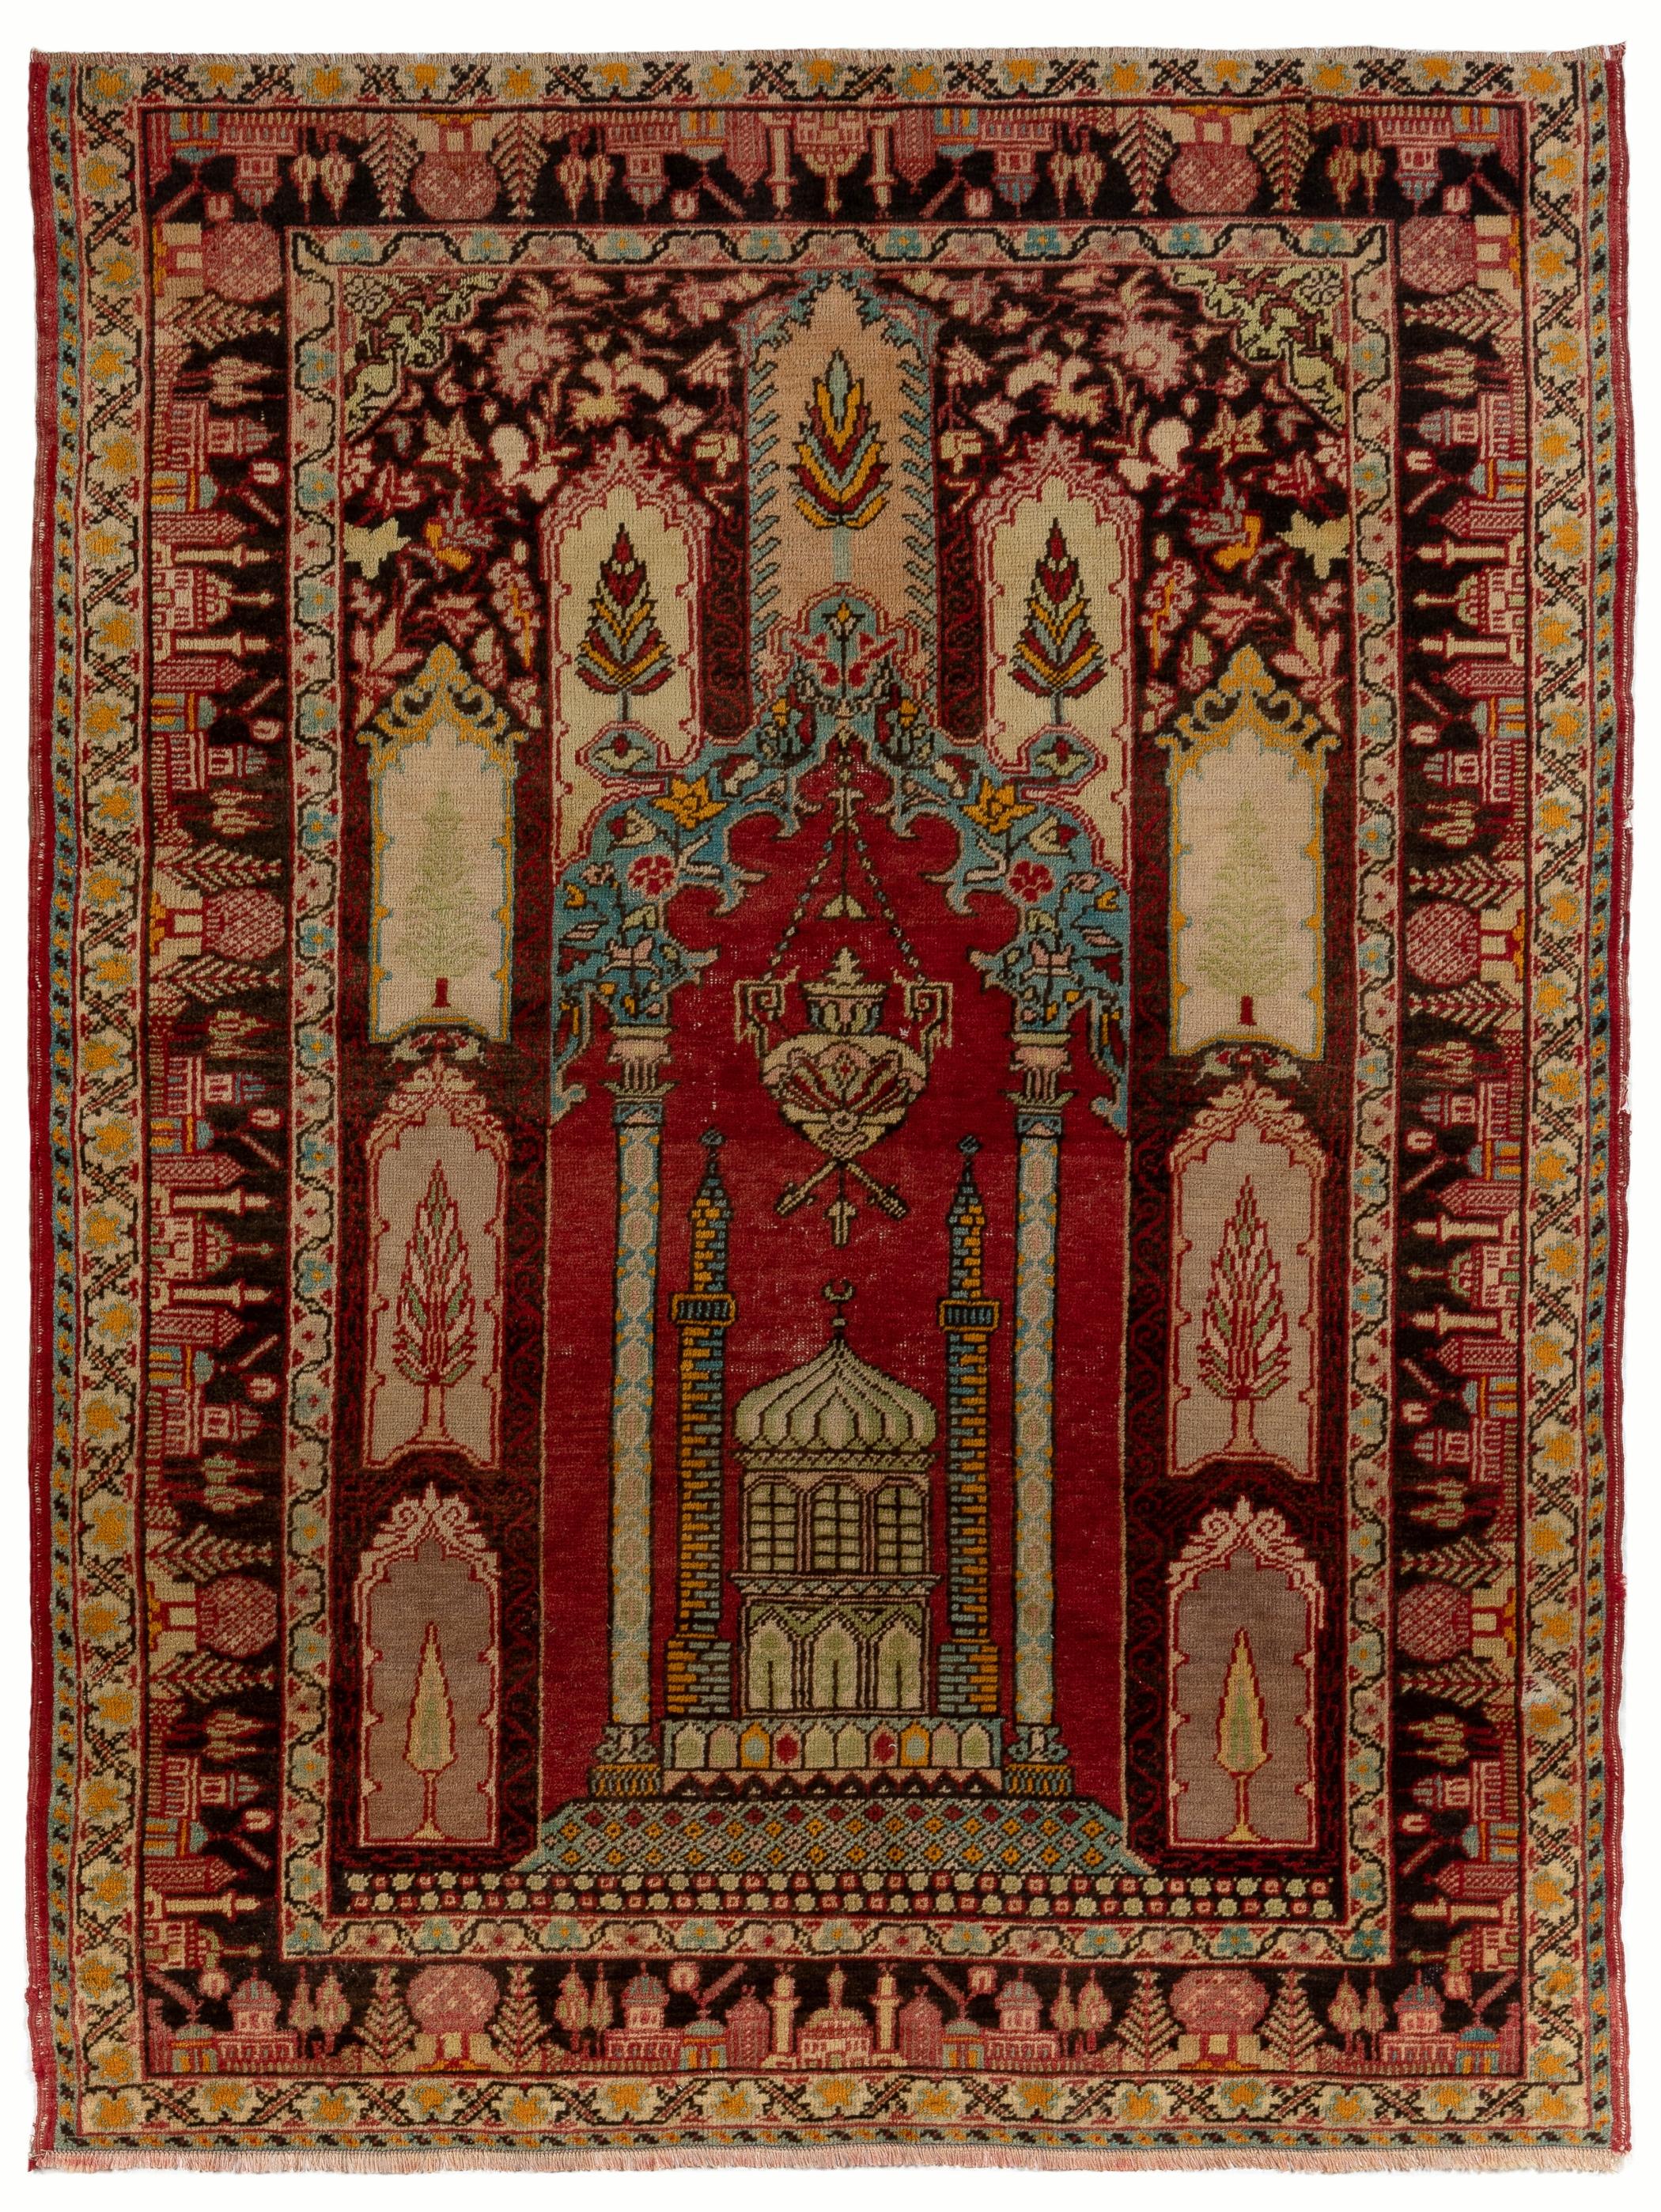 A one-of-a-kind semi antique Anatolian prayer rug featuring a carefully constructed arch design, framing at its base the depiction of a mosque that stands under a large pendant lamp and between two grand columns reaching into the ornate crown of the